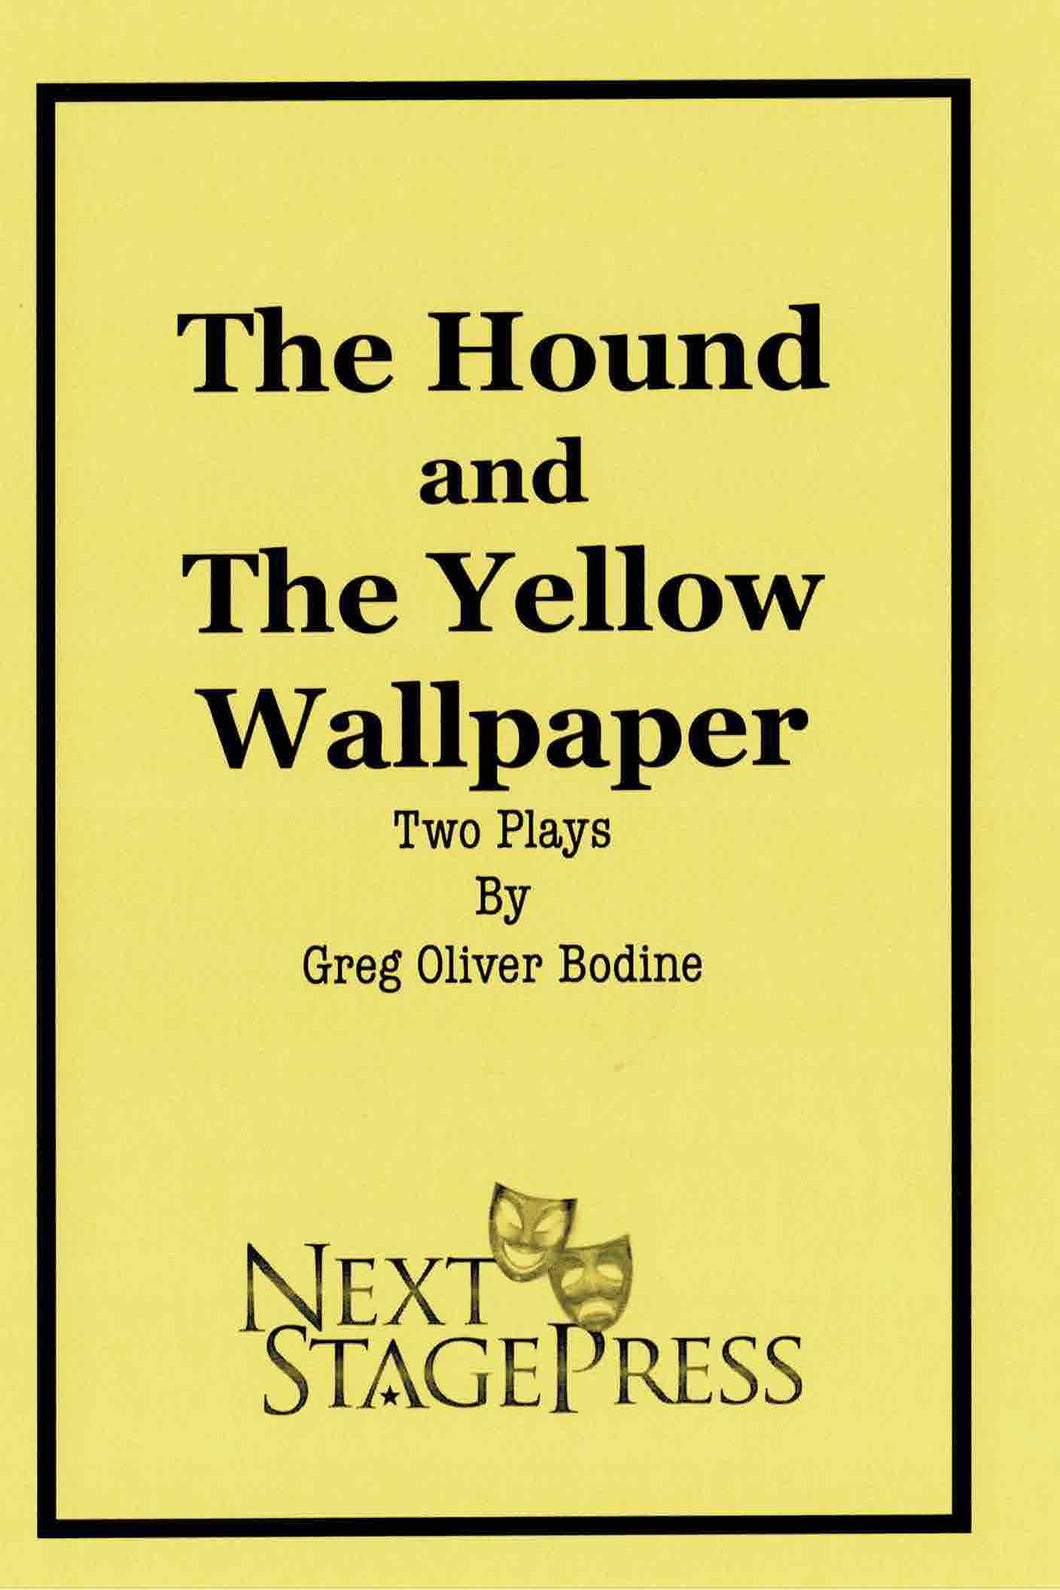 THE HOUND/THE YELLOW WALLPAPER by Greg Oliver Bodine